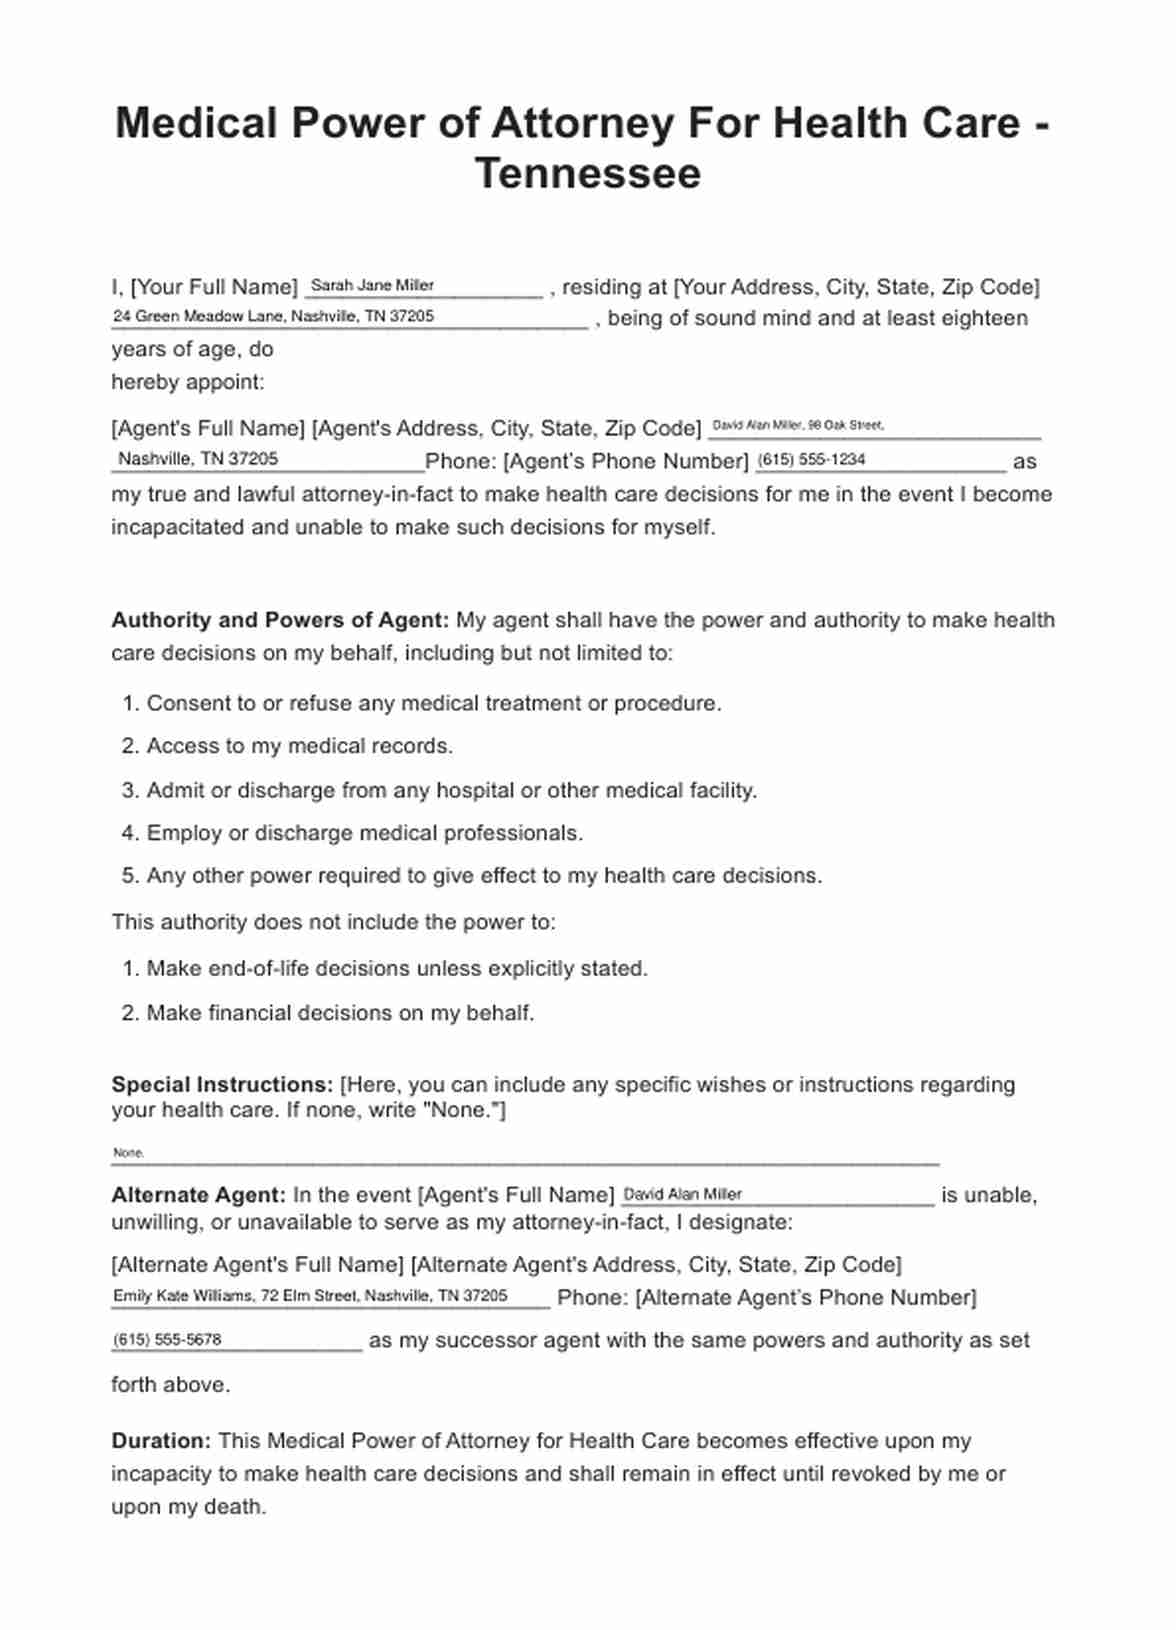 Medical Power Of Attorney Tennessee Forms PDF Example